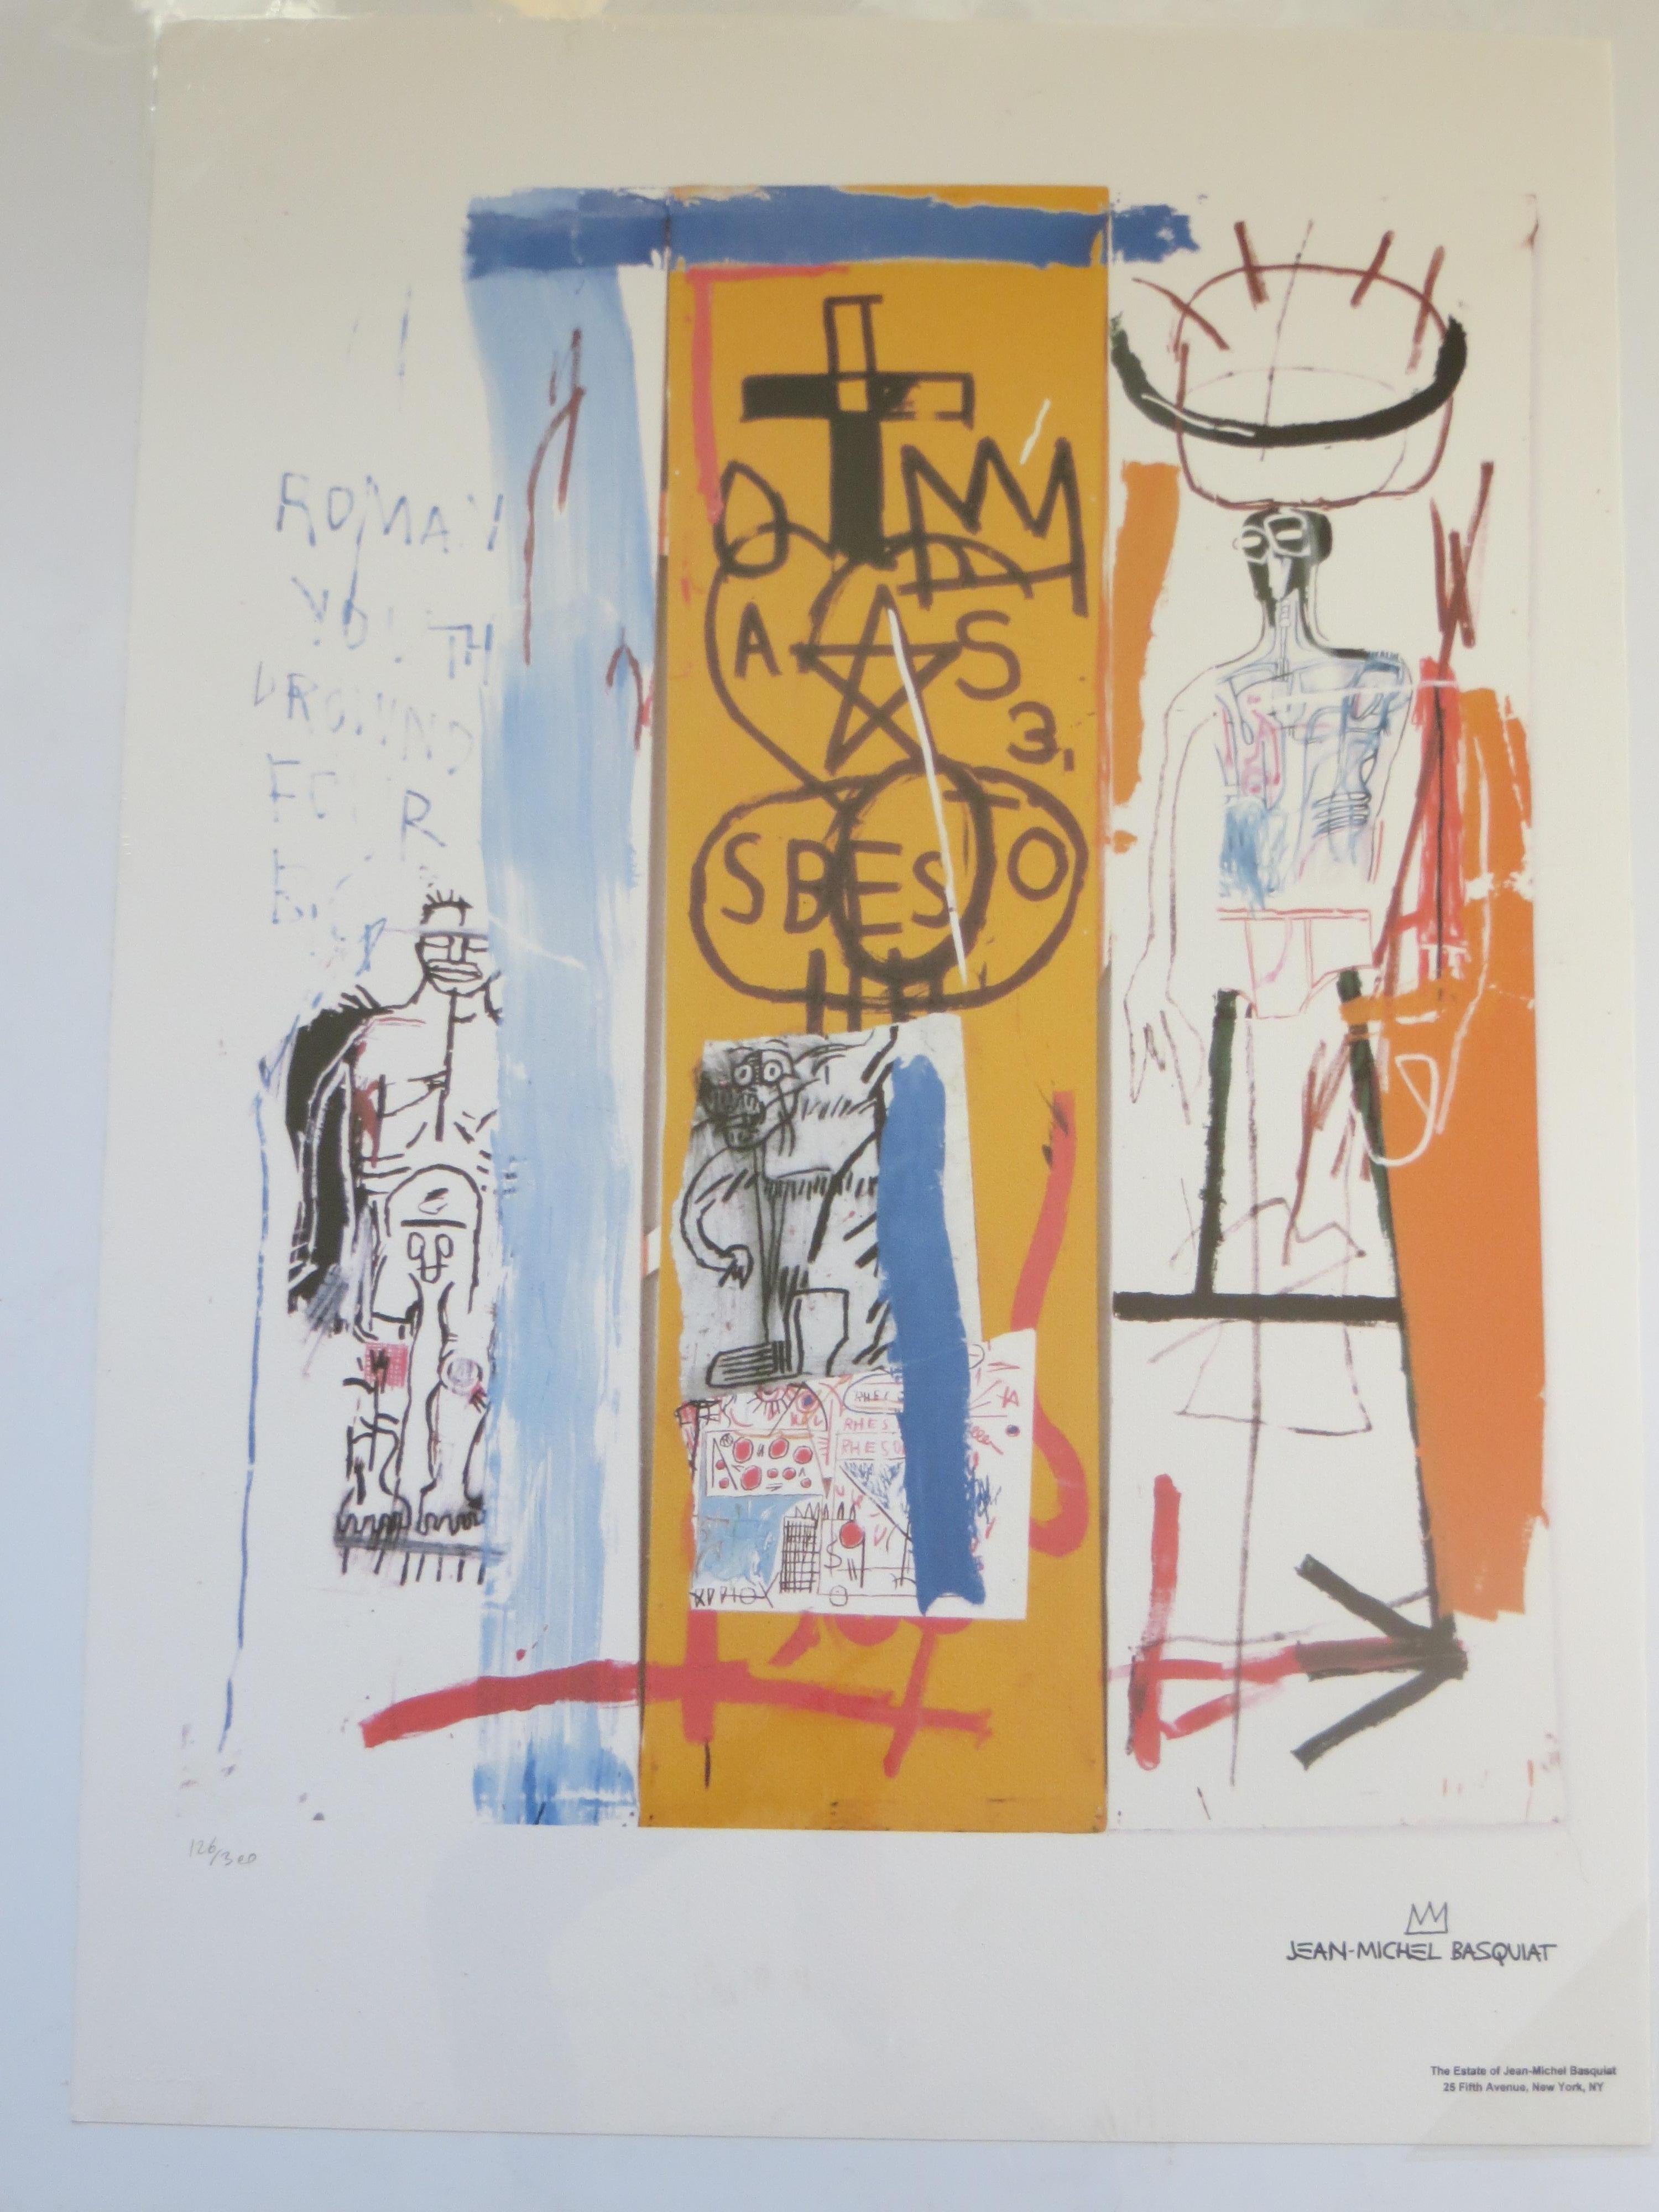 After Jean-Michel Basquiat, Self Portrait Lithograph,  Limited Edition.
Estate of JM Basquiat 2010-2012.
This one is a lithograph signed on the plate and numbered on 126 / 300

Jean Michel Basquiat ( 1960 - 1988 ) was born to two Haitian immigrants